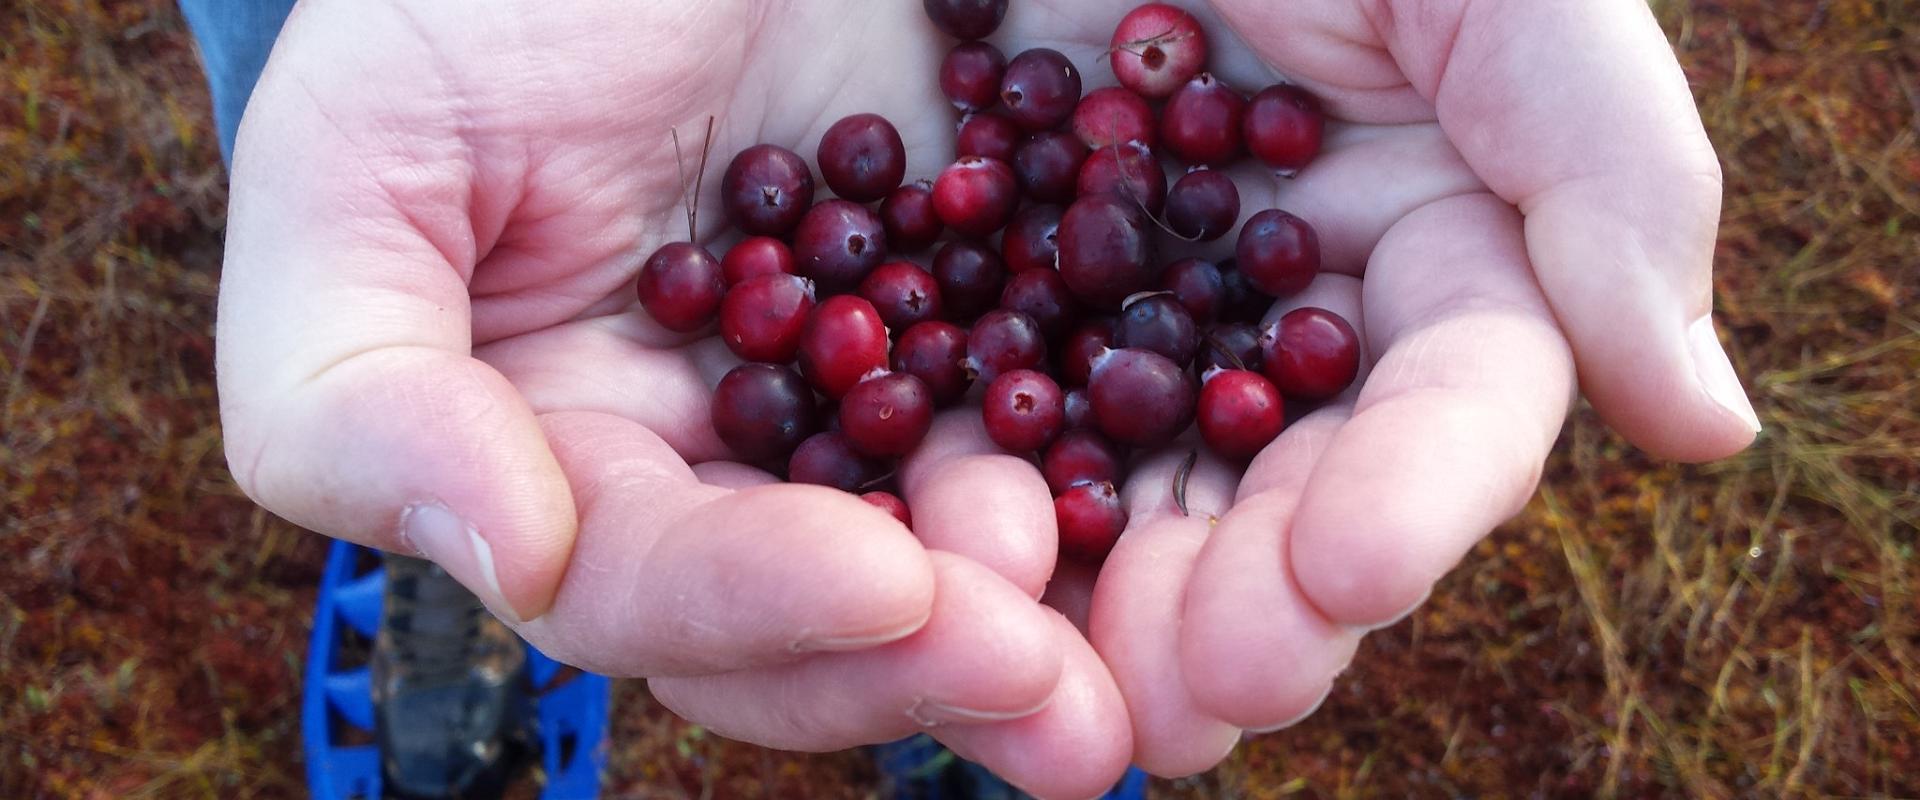 Every Estonian loves cranberries. A local nature guide will introduce the wonderful bogs with numerous bog pools, soft hollows, and secret streams. We